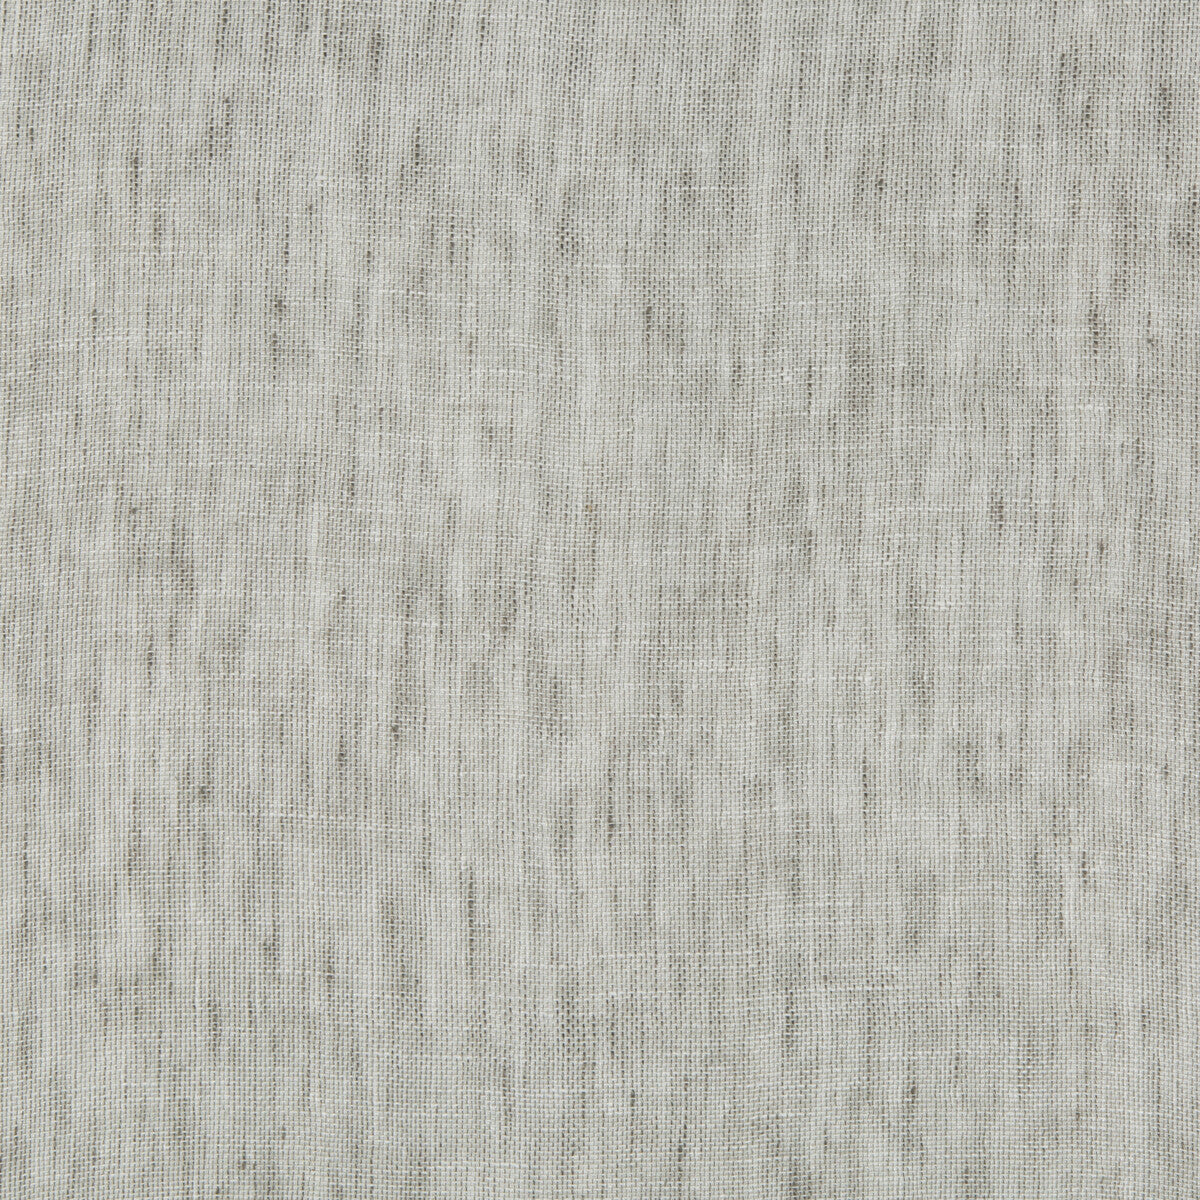 Lunada fabric in silver color - pattern 4548.11.0 - by Kravet Basics in the Jeffrey Alan Marks Oceanview collection